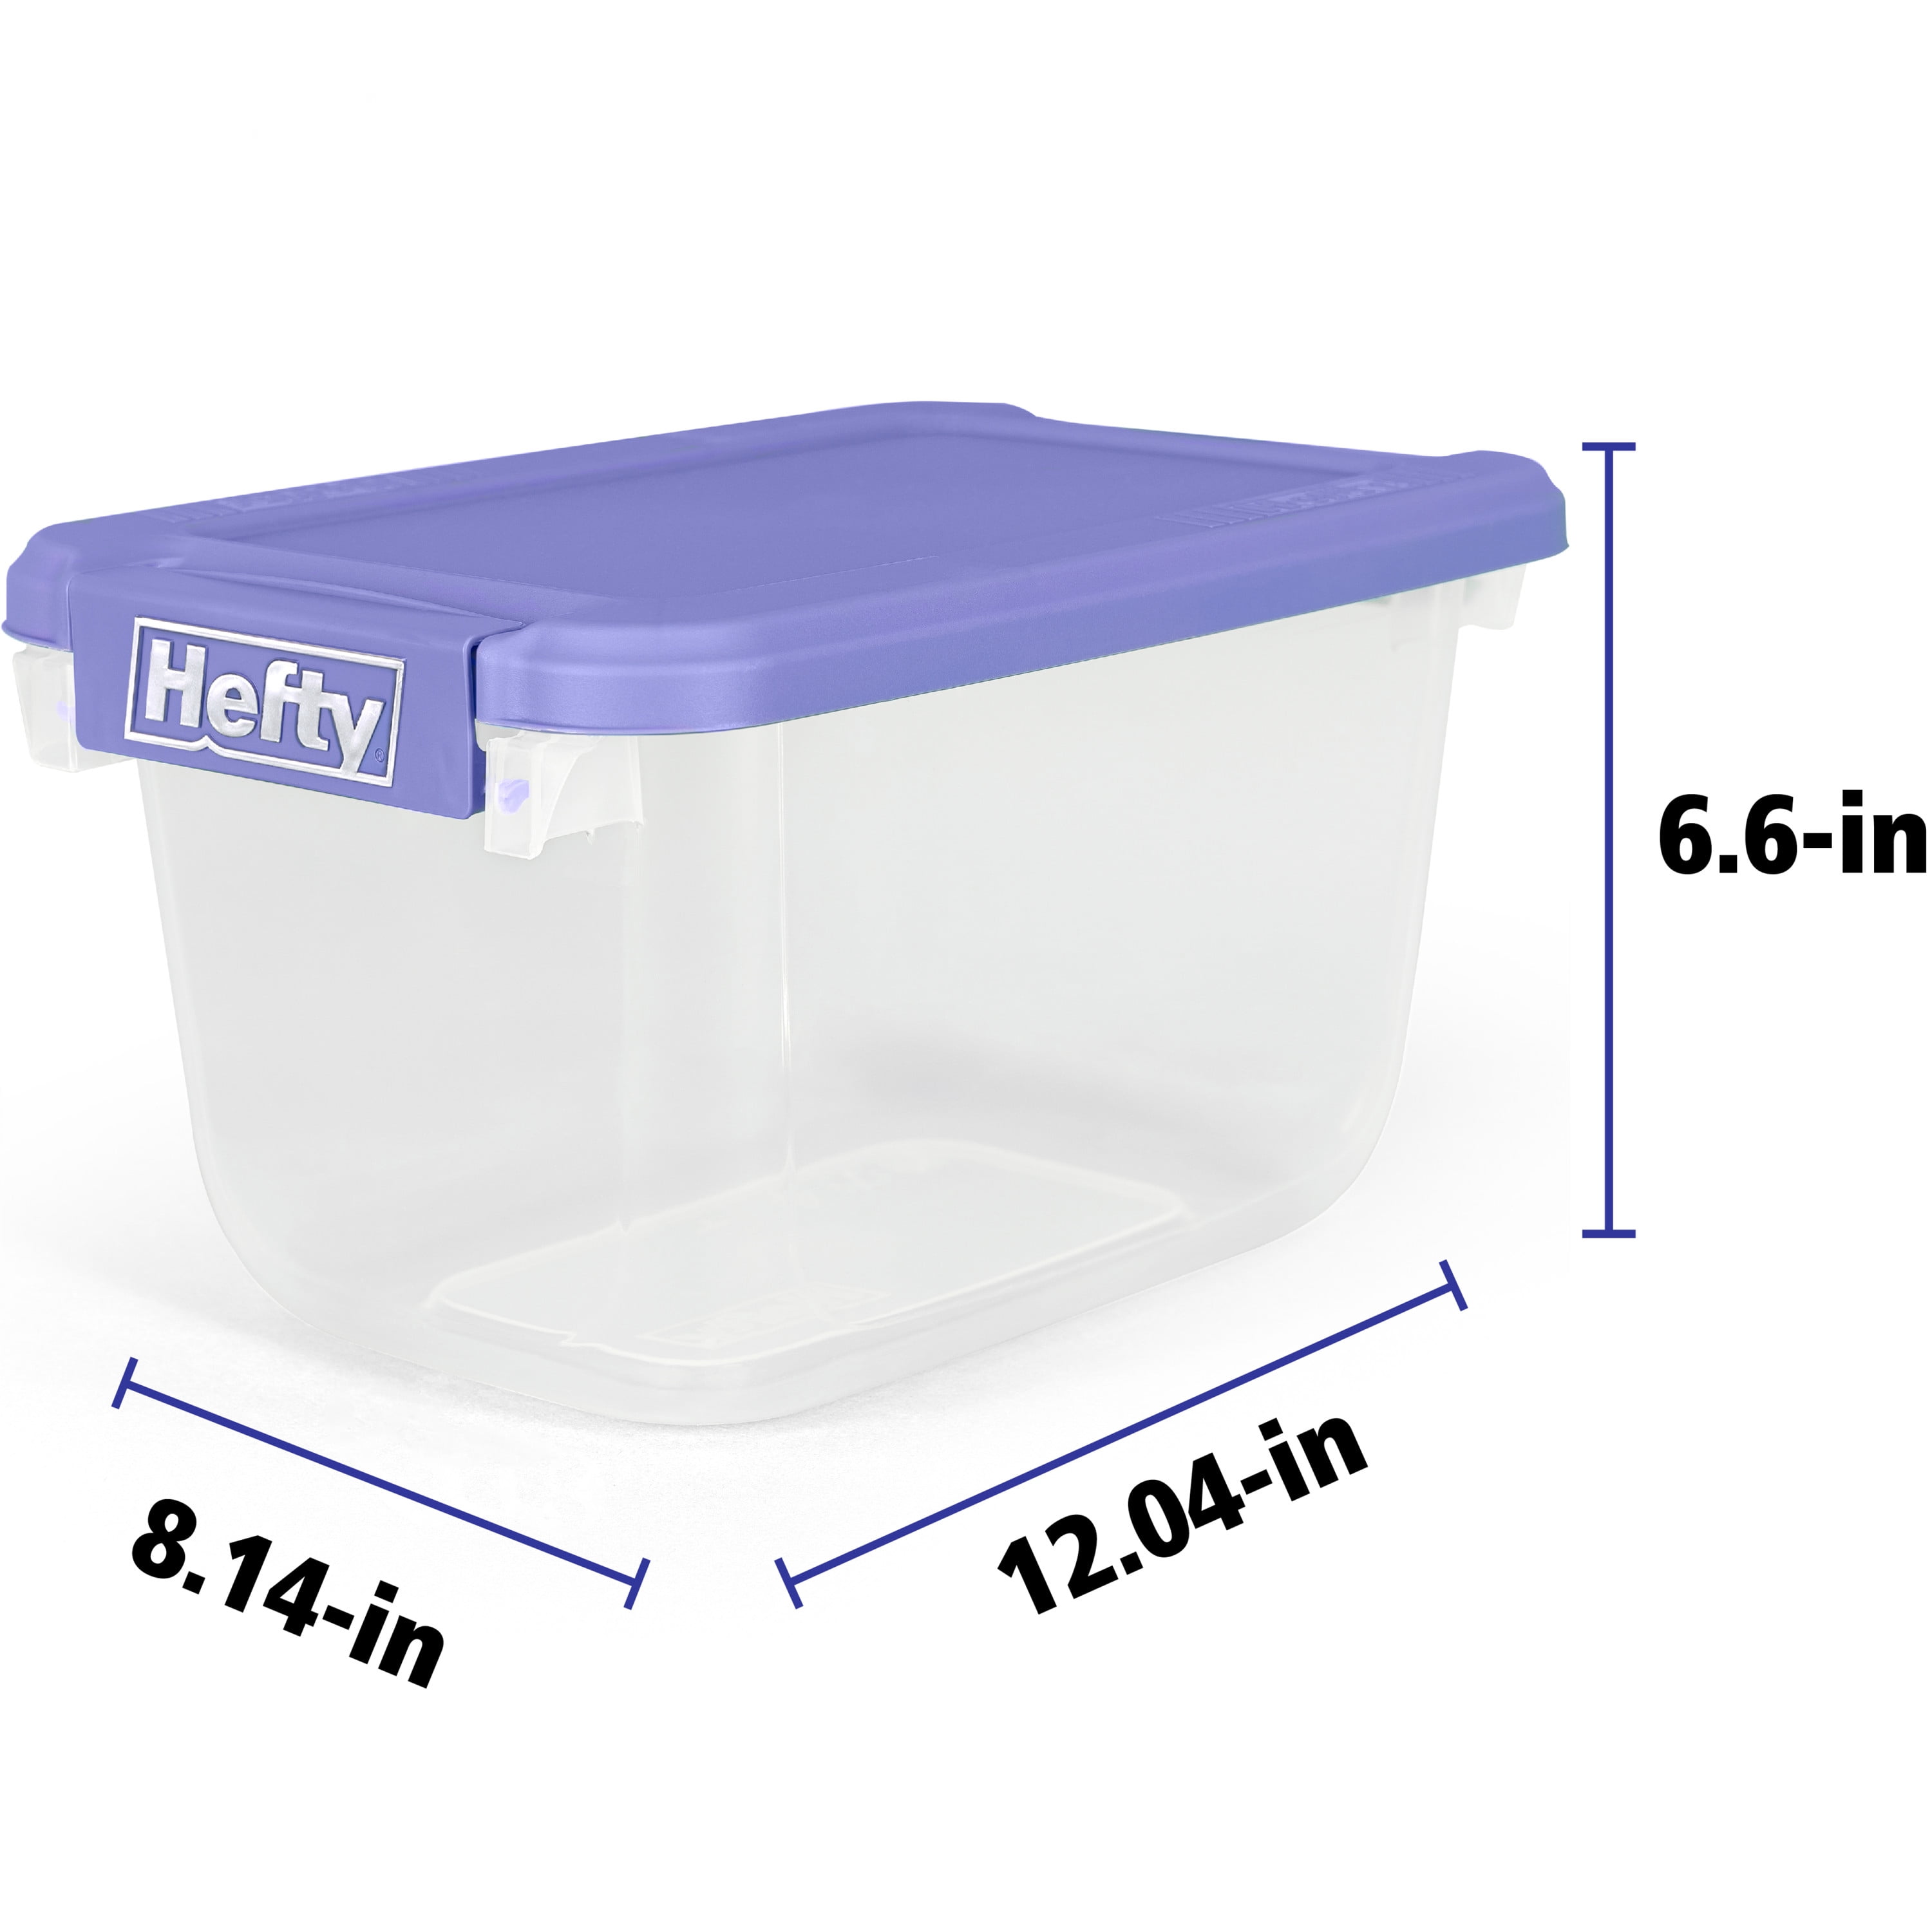 Hefty Clear Plastic Bin with Smoke Blue Lid (8 Pack) - 6.5 qt Storage Container with Lid, Ideal Space Saver for Closet Shoe Storage Bins and Under